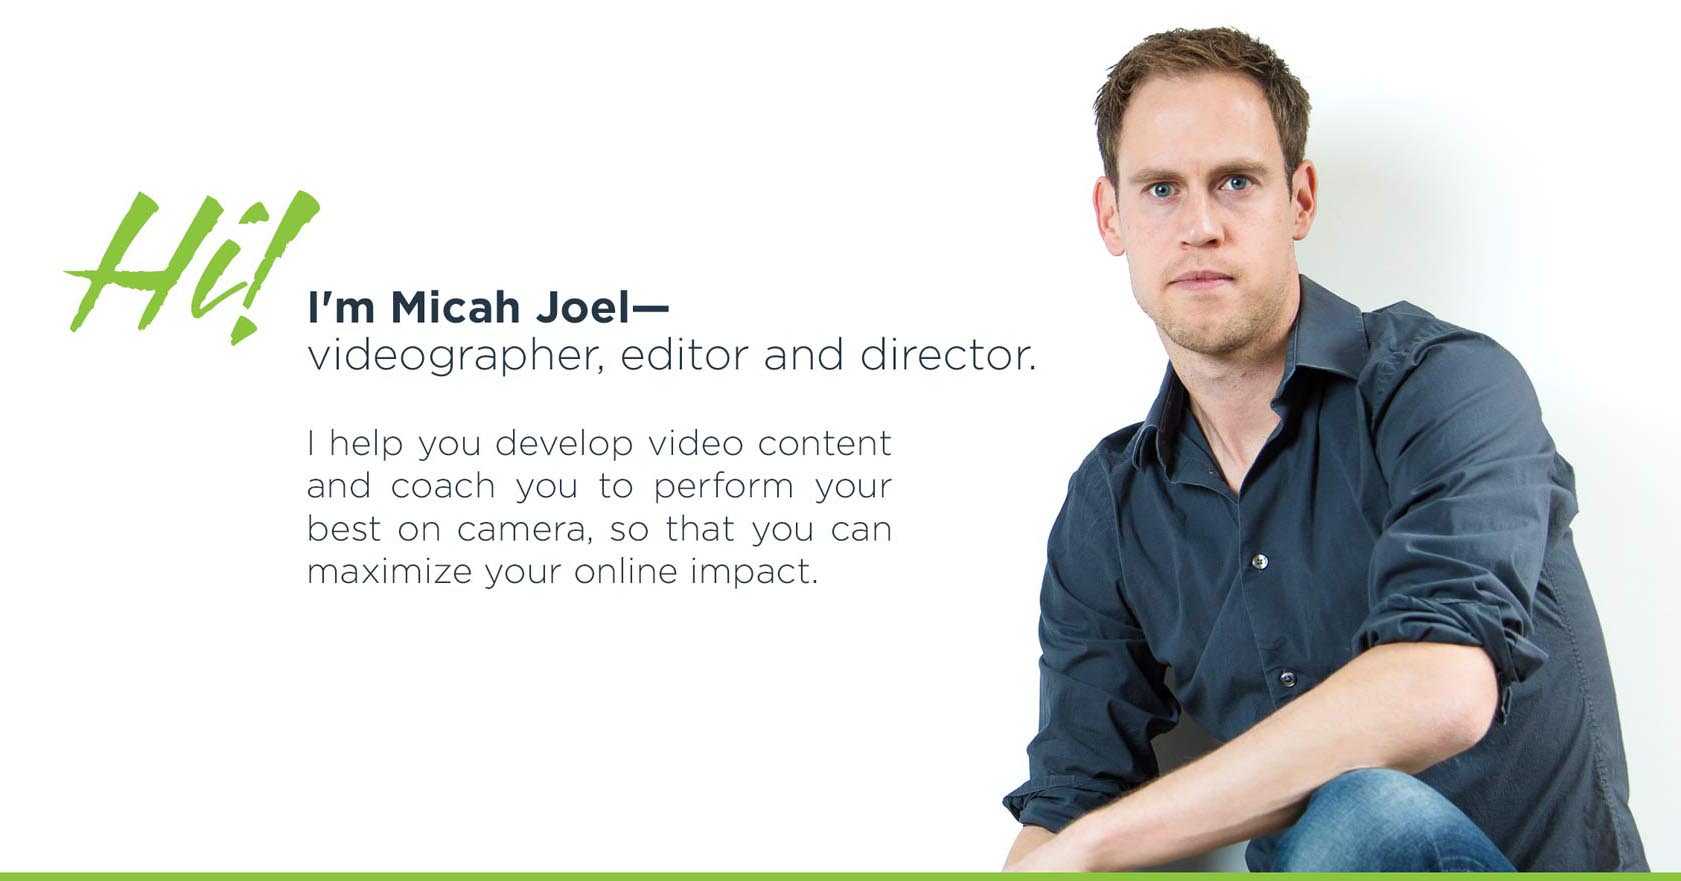 Hi! I'm Micah Joel—videographer, editor, and director. I help you develop video content and coach you to perform your best on camera, so that you can maximize your online impact.